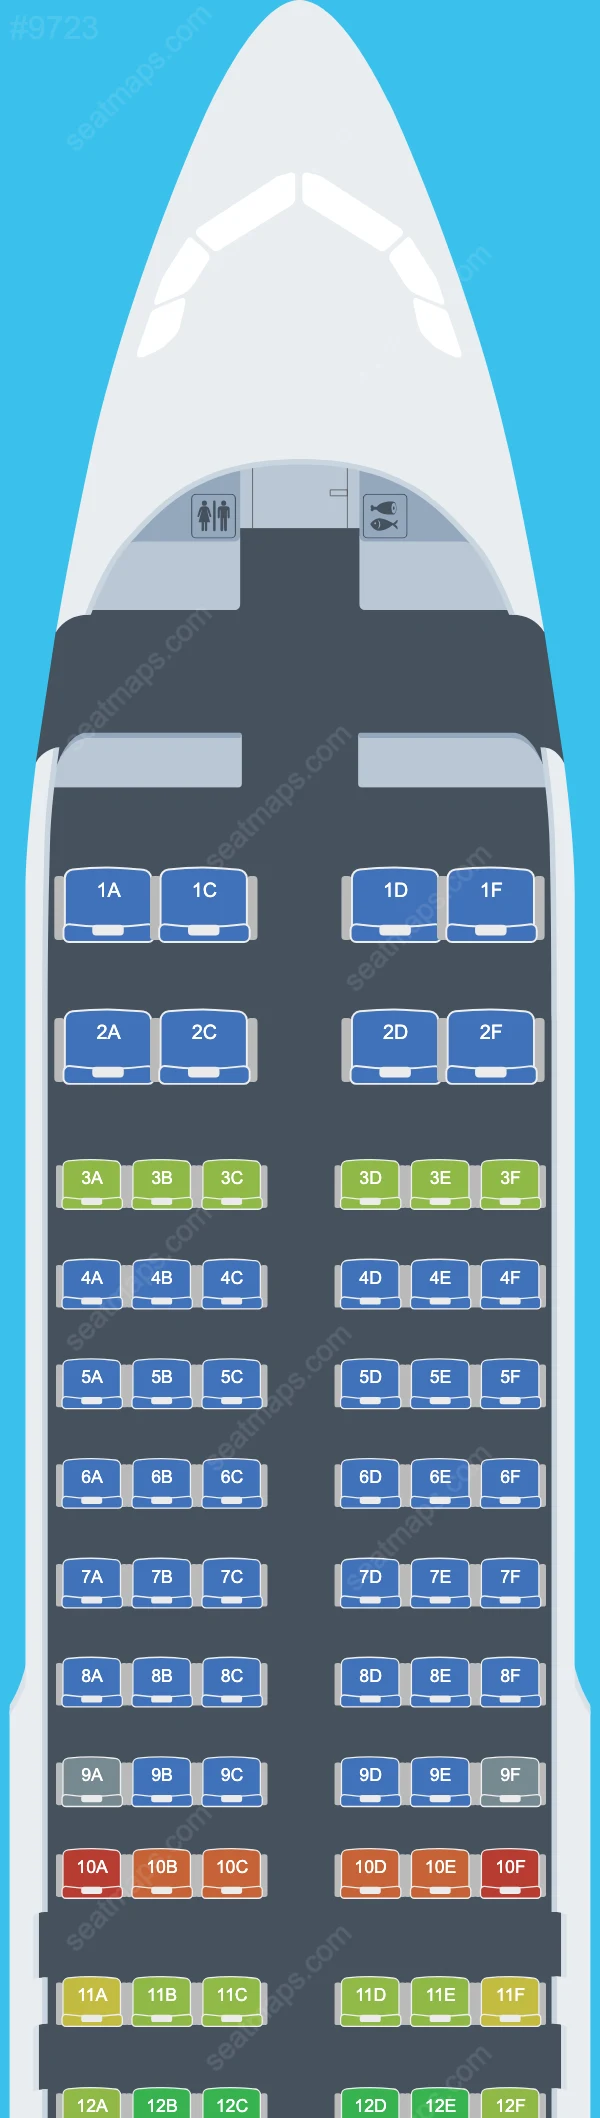 Ural Airlines Airbus A320 Seat Maps A320-200neo